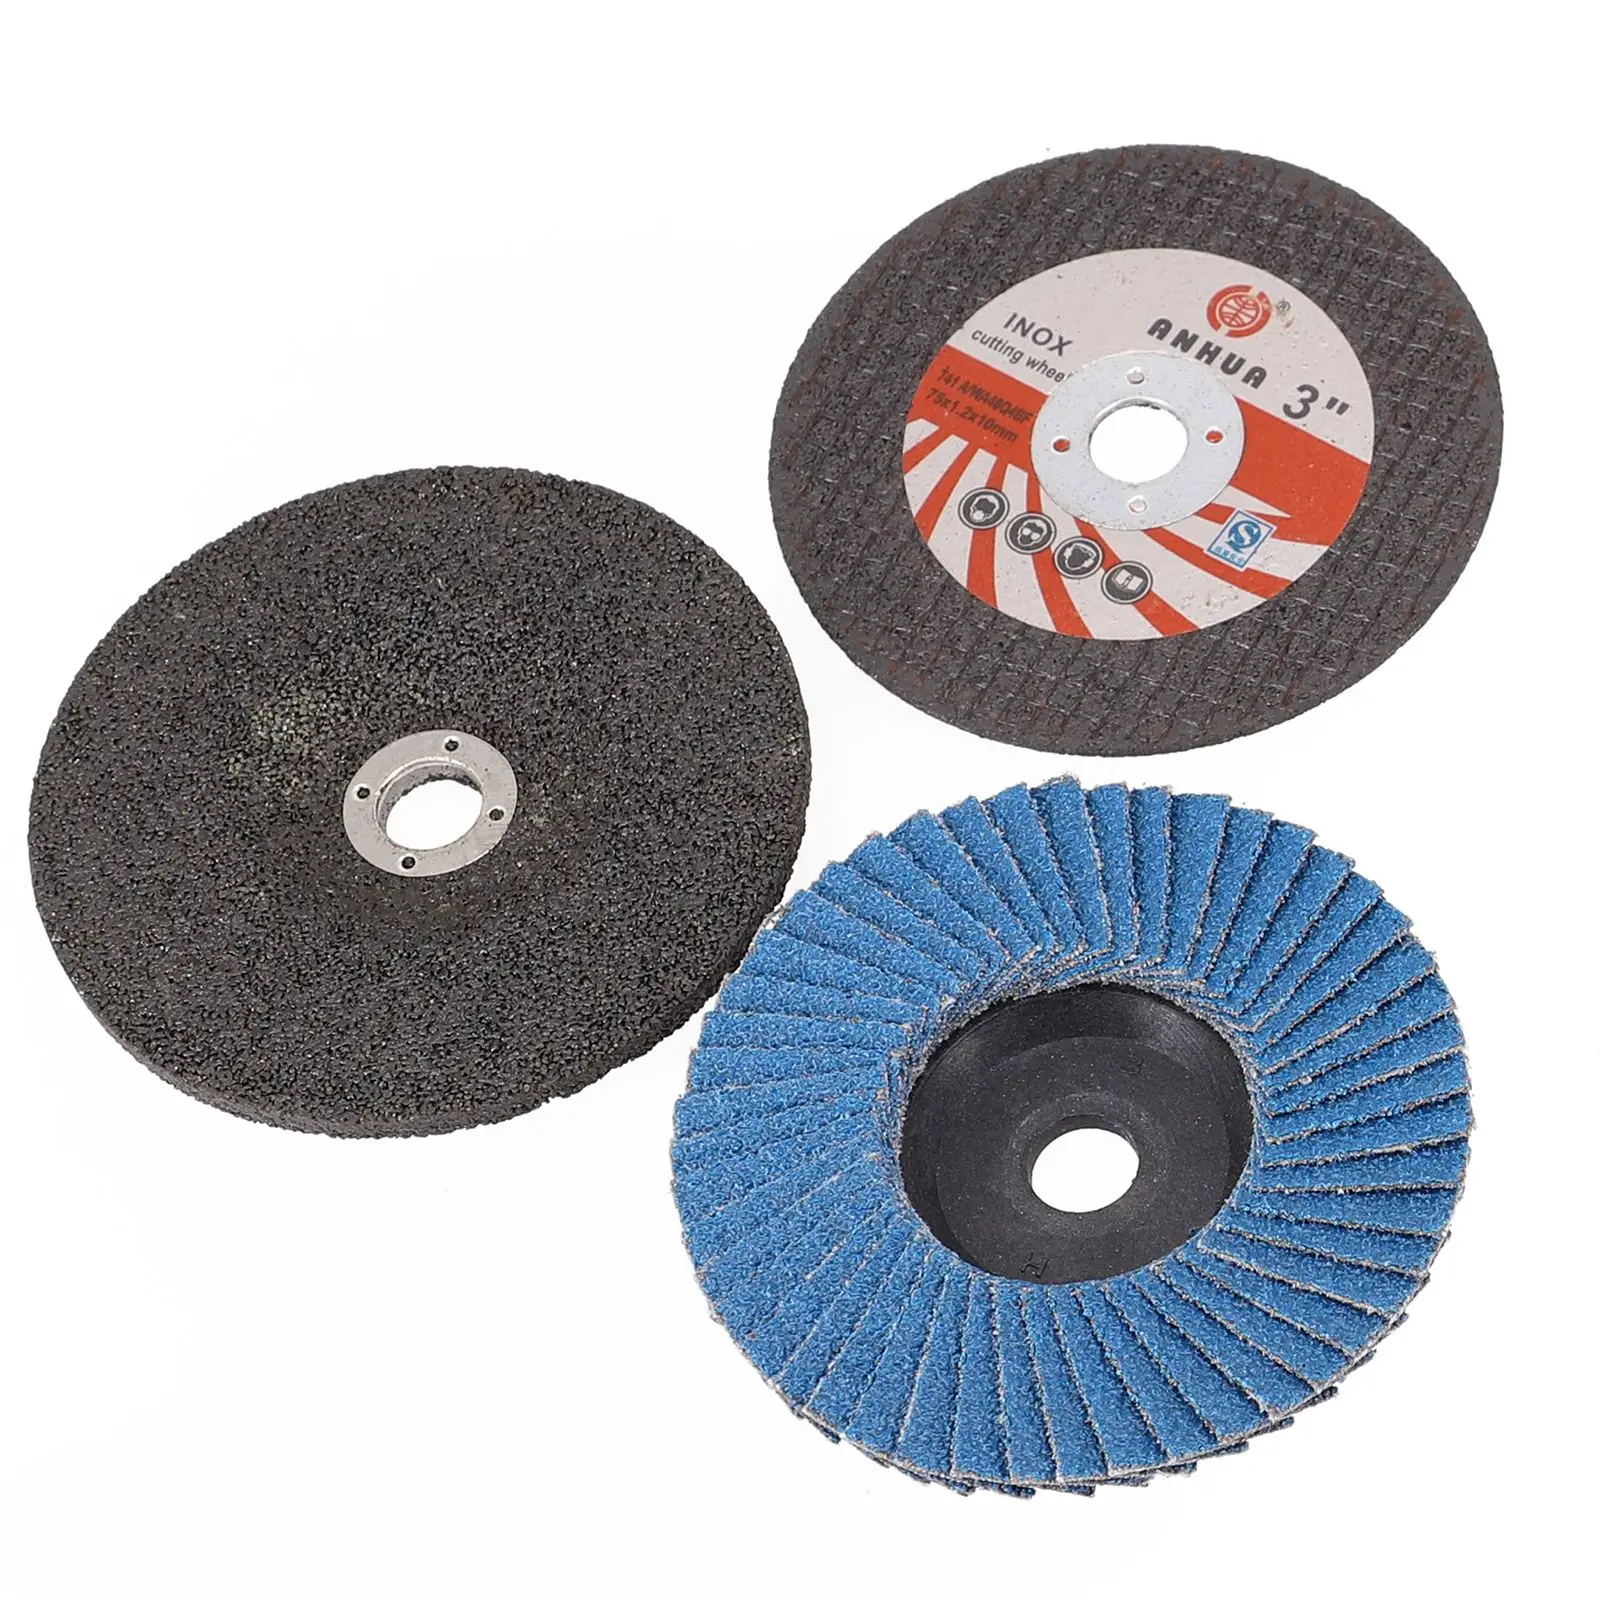 Brand New Cutting Disc Grinding Wheel Circular Saw Blade For Angle Grinder For Ceramic Tile Wood Polishing Disc 5in angle grinder chain disc 9 teeth saw wheel wood carving circular slotting cutting blade diy